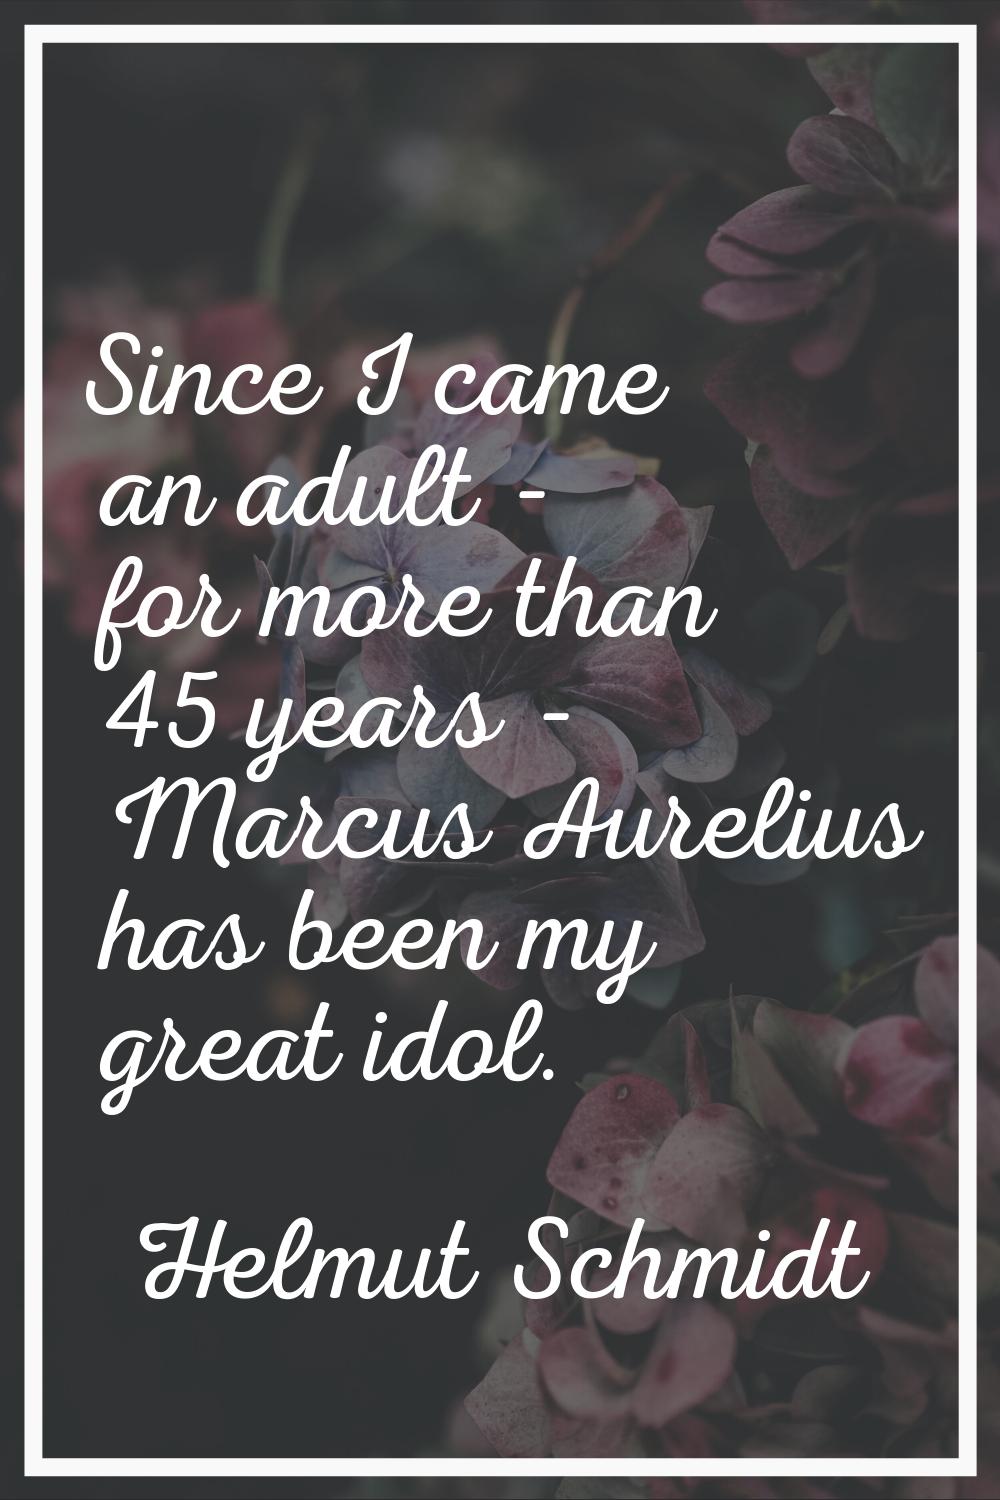 Since I came an adult - for more than 45 years - Marcus Aurelius has been my great idol.